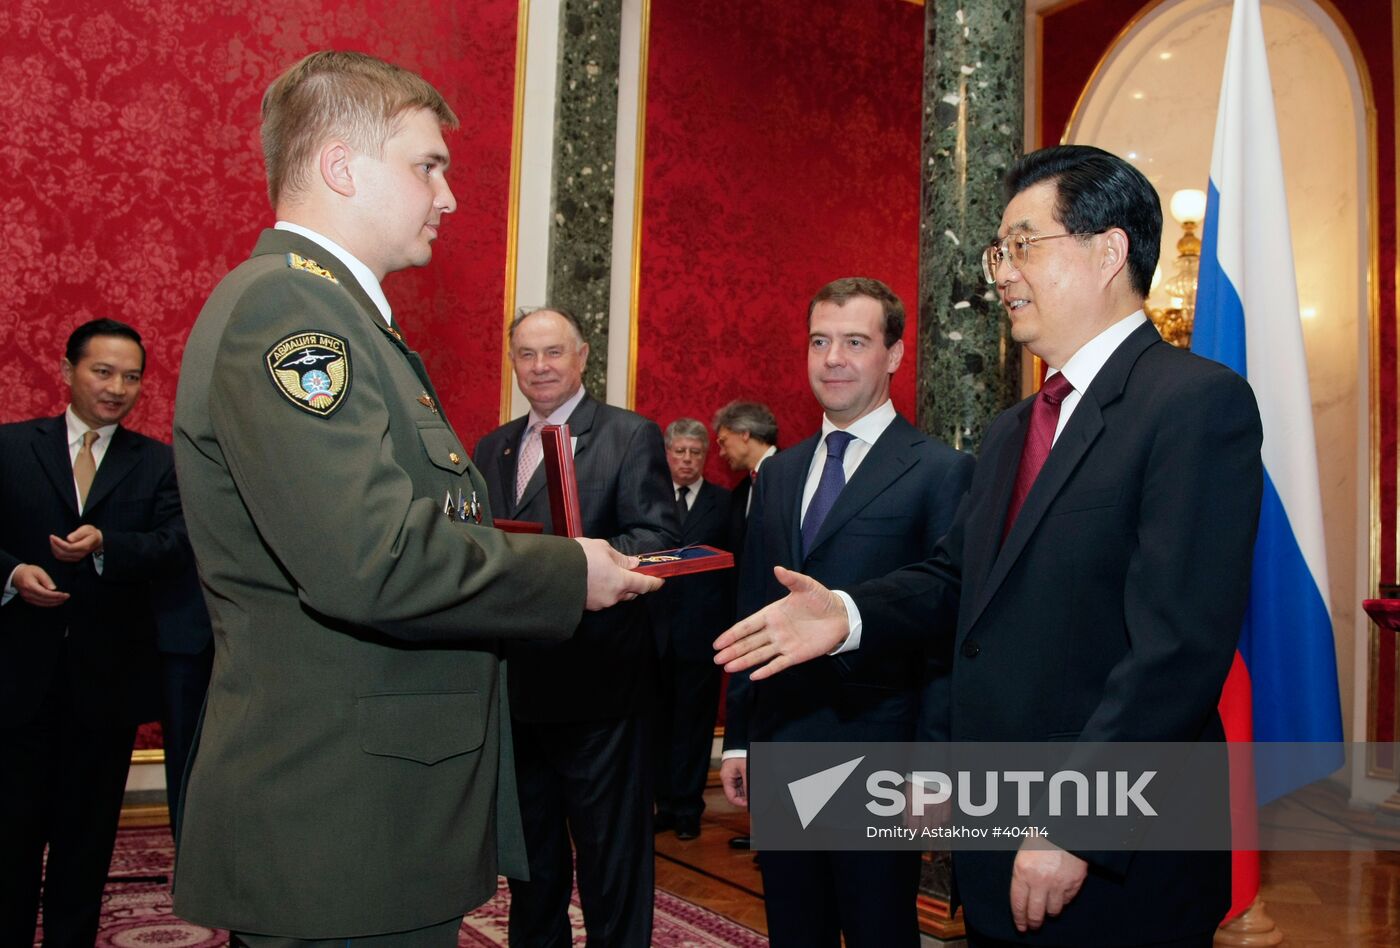 Chinese President Hu Jintao's state visit to Russia